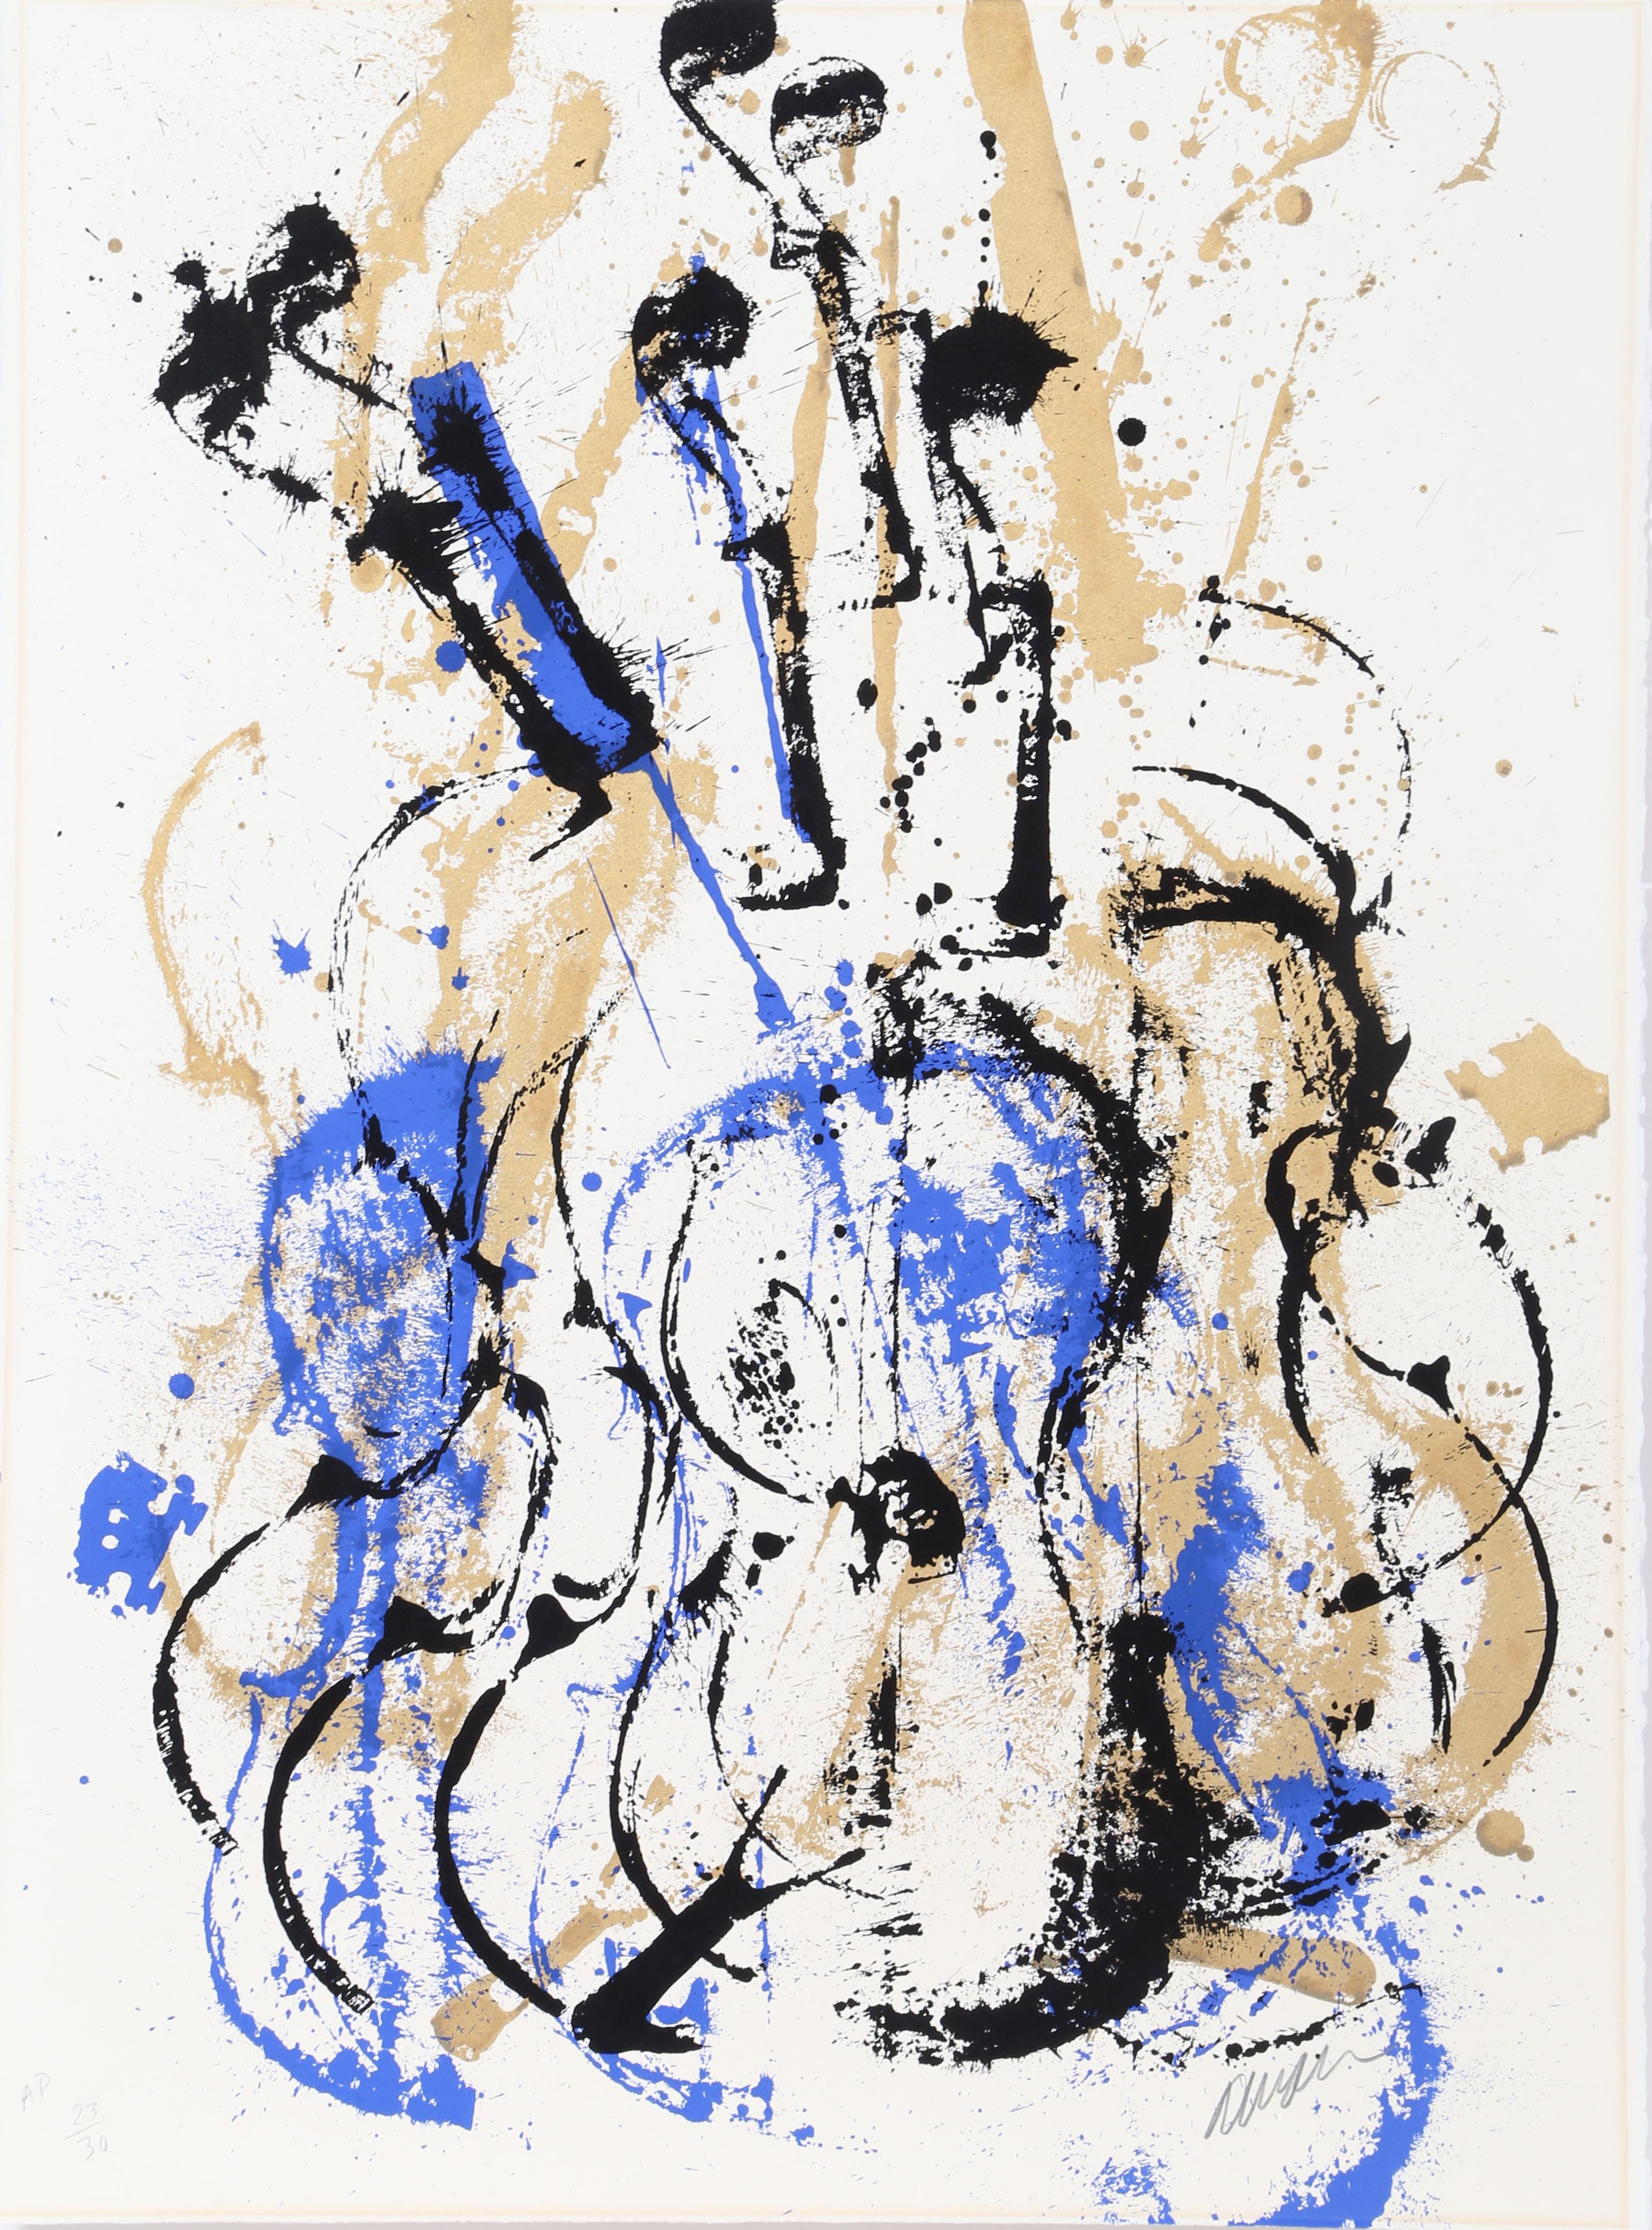 This print of a violin replicated several times in blue, black and gold across the composition is indicative of Arman's classic technique of recomposition. Transferring the image across the picture plane several times in two colors, the artist